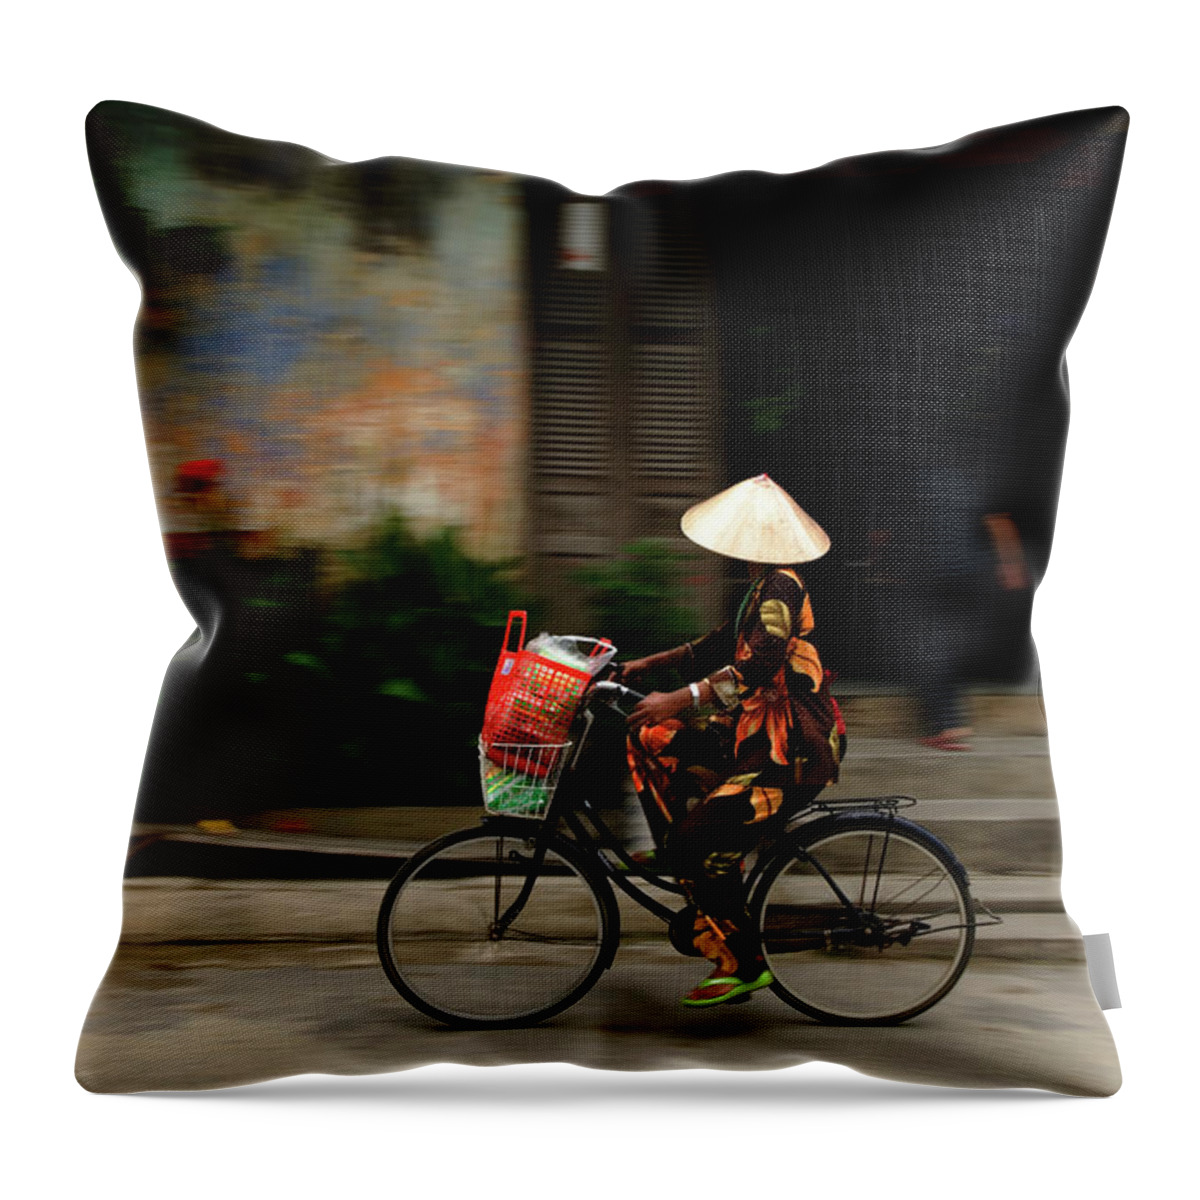 Mature Adult Throw Pillow featuring the photograph Woman On Bicycle, Hoi An, Vietnam by Jeremy Horner